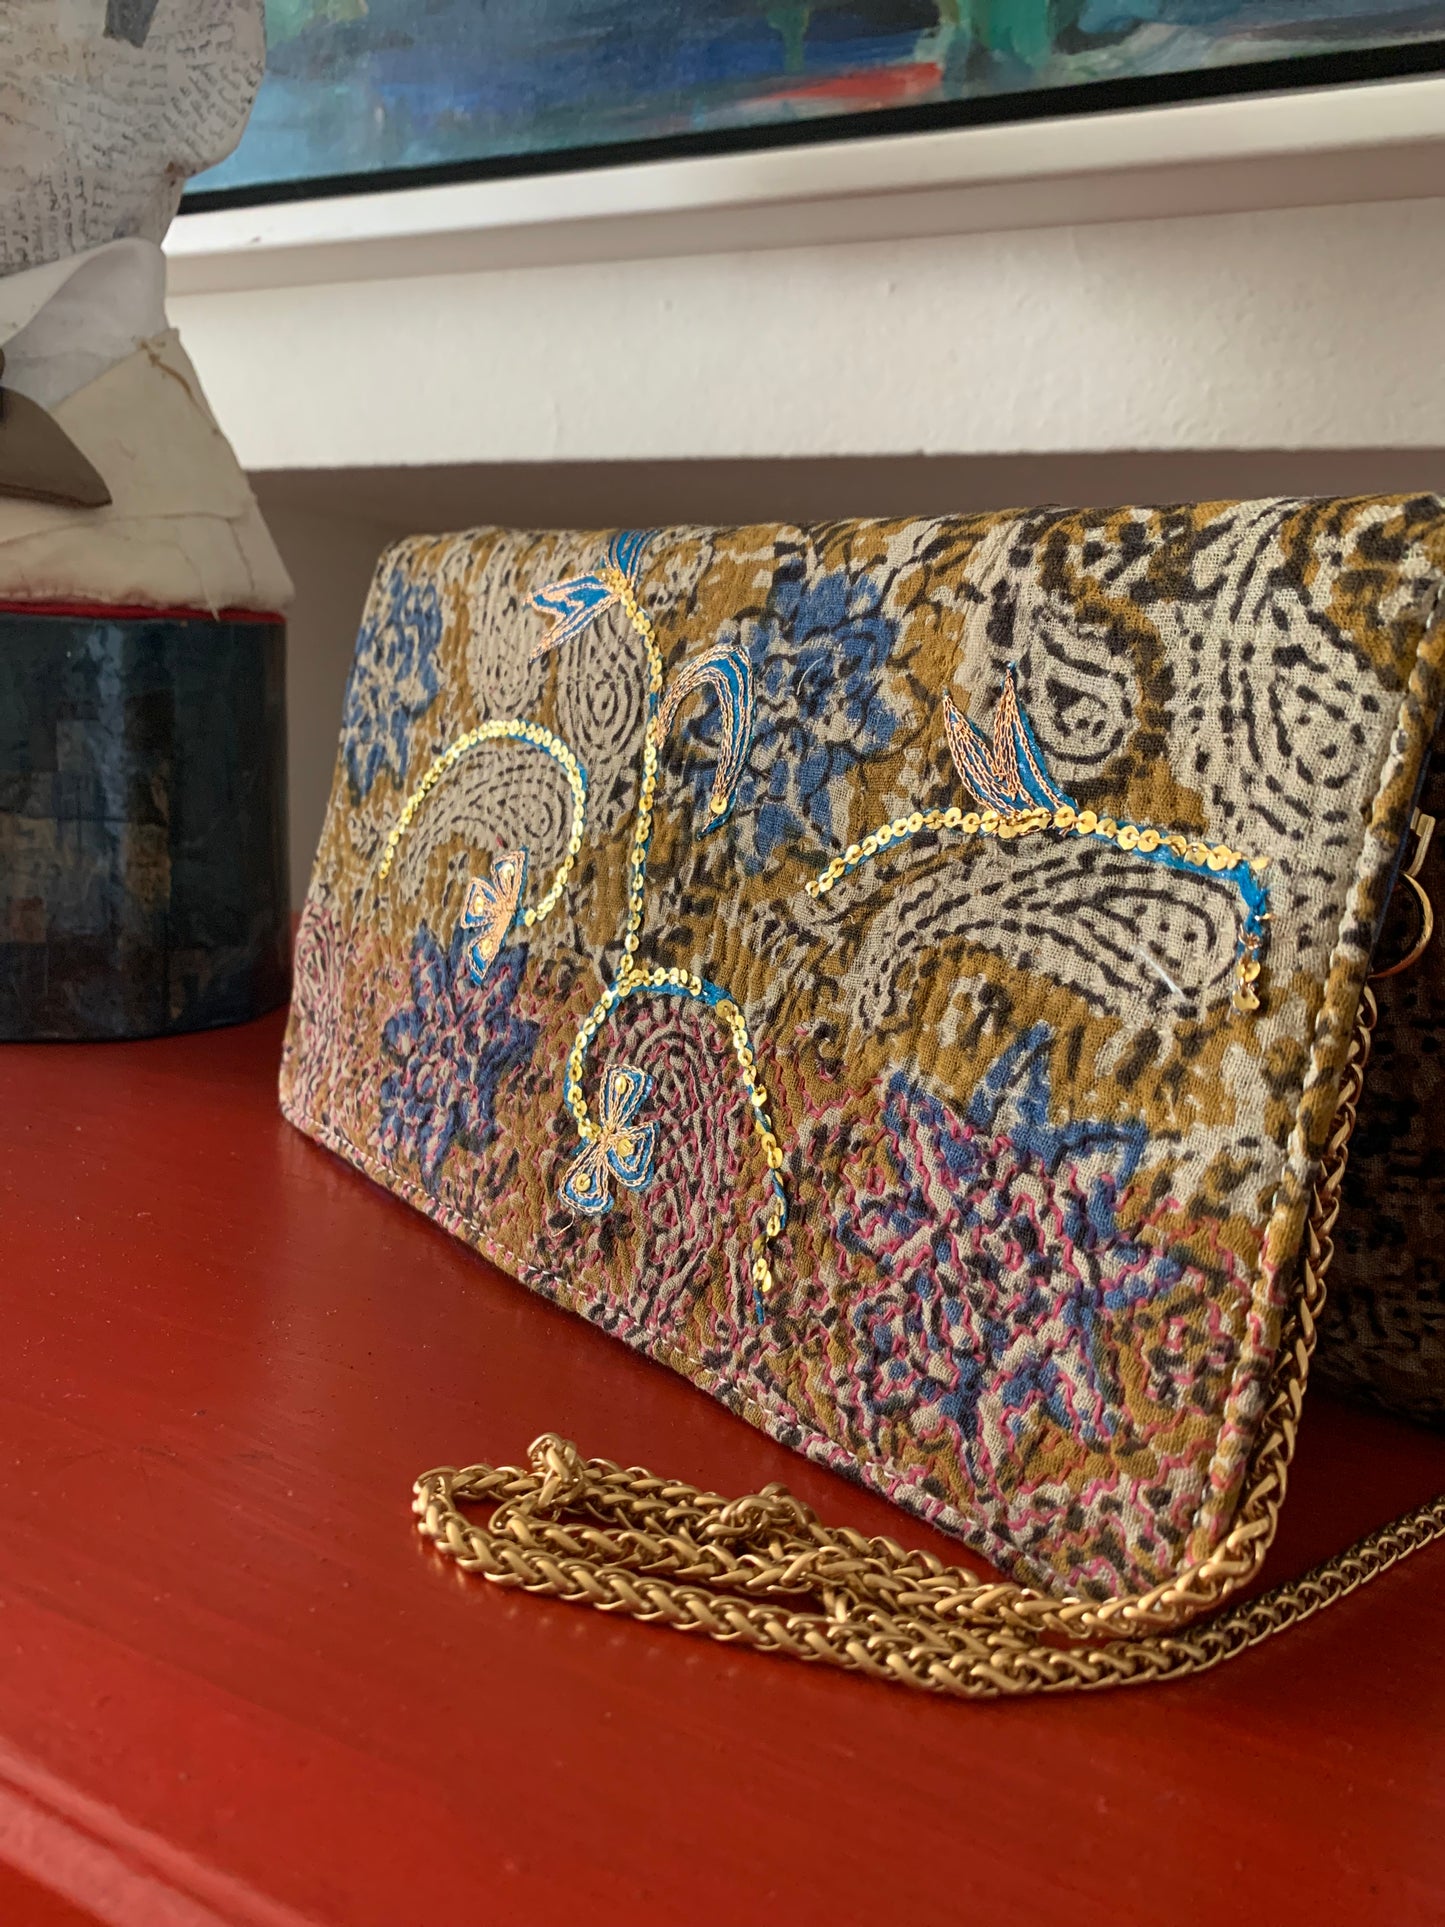 Sustainable: Handcrafted Vintage Clutch with Embroidered Detailing